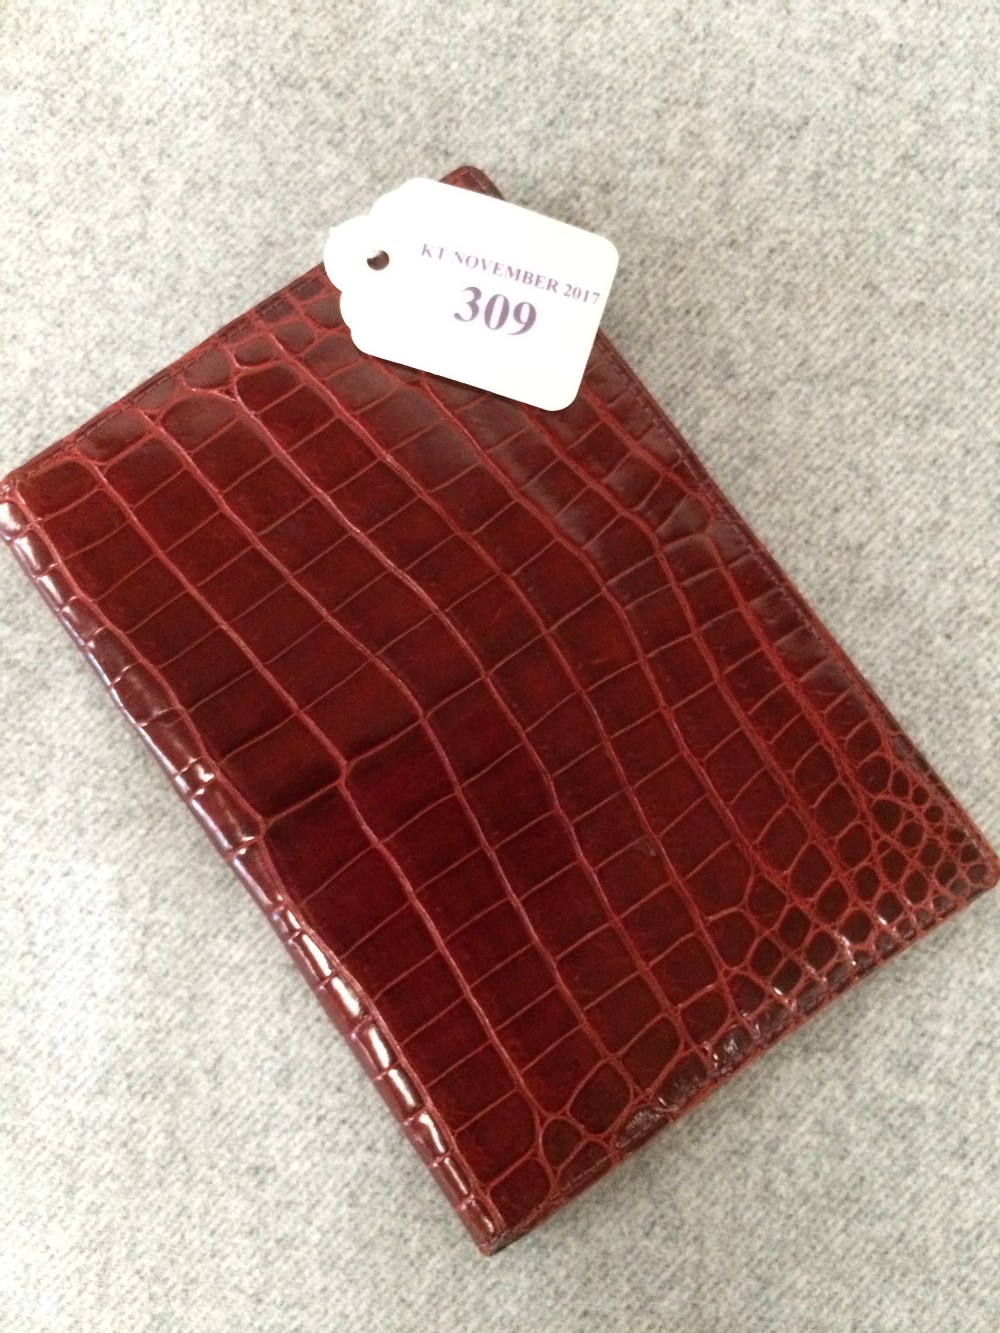 Red crocodile wallet - Image 3 of 3